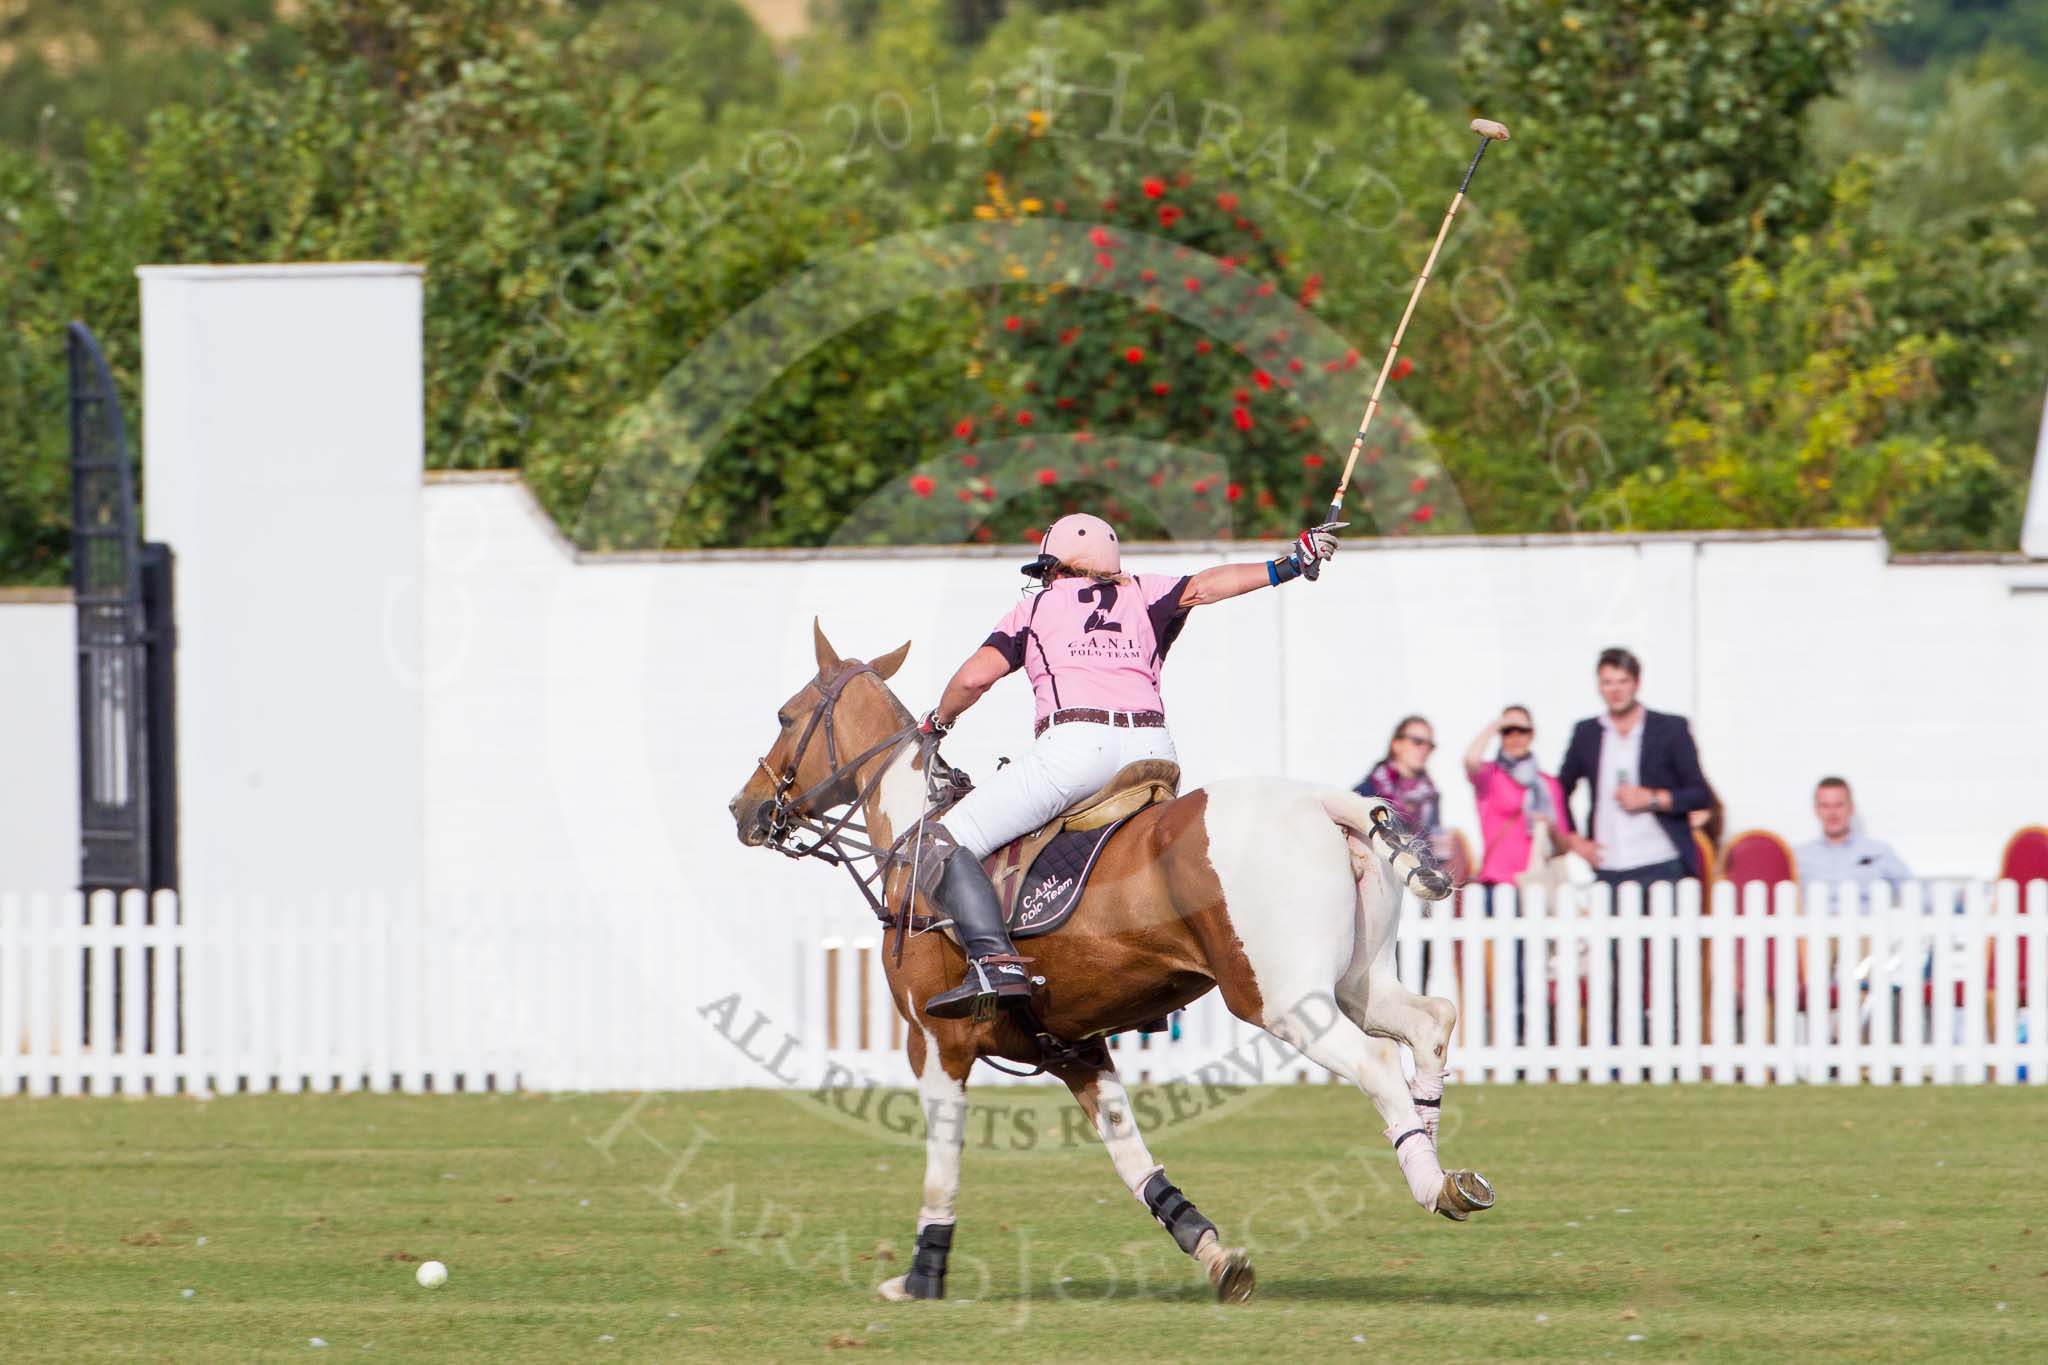 DBPC Polo in the Park 2013, Final of the Tusk Trophy (4 Goals), Rutland vs C.A.N.I..
Dallas Burston Polo Club, ,
Southam,
Warwickshire,
United Kingdom,
on 01 September 2013 at 16:53, image #617